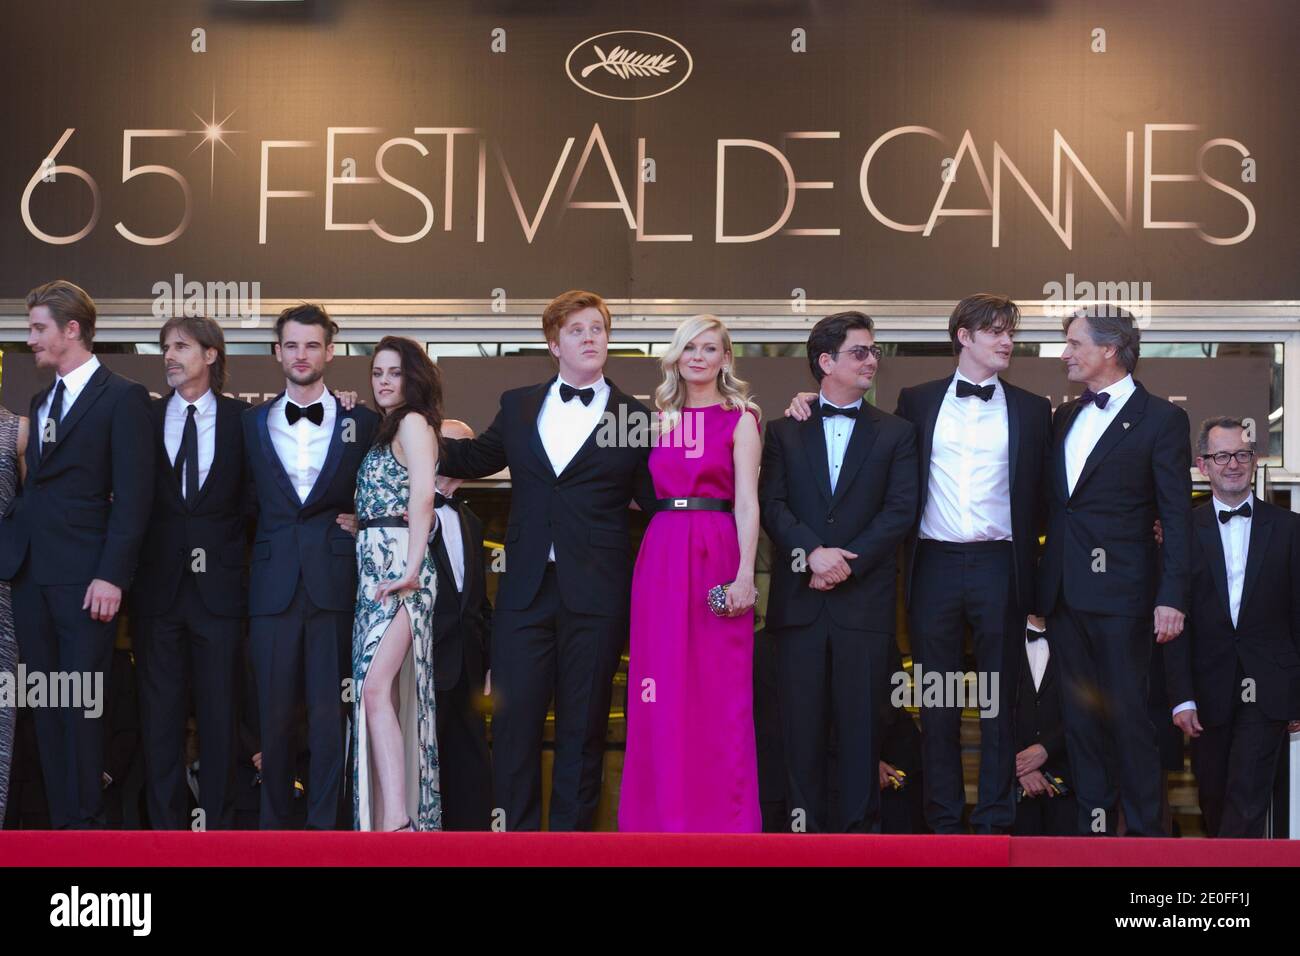 (L-R) Actors Tom Sturridge, Kristen Stewart, Danny Morgan, Kirsten Dunst, producer Roman Coppola, actor Sam Riley and actor Viggo Mortensen attending the 'On The Road' Premiere during the 65th Annual Cannes Film Festival at Palais des Festivals on May 23, 2012 in Cannes, France. Photo by Frederic Nebinger/ABACAPRESS.COM Stock Photo